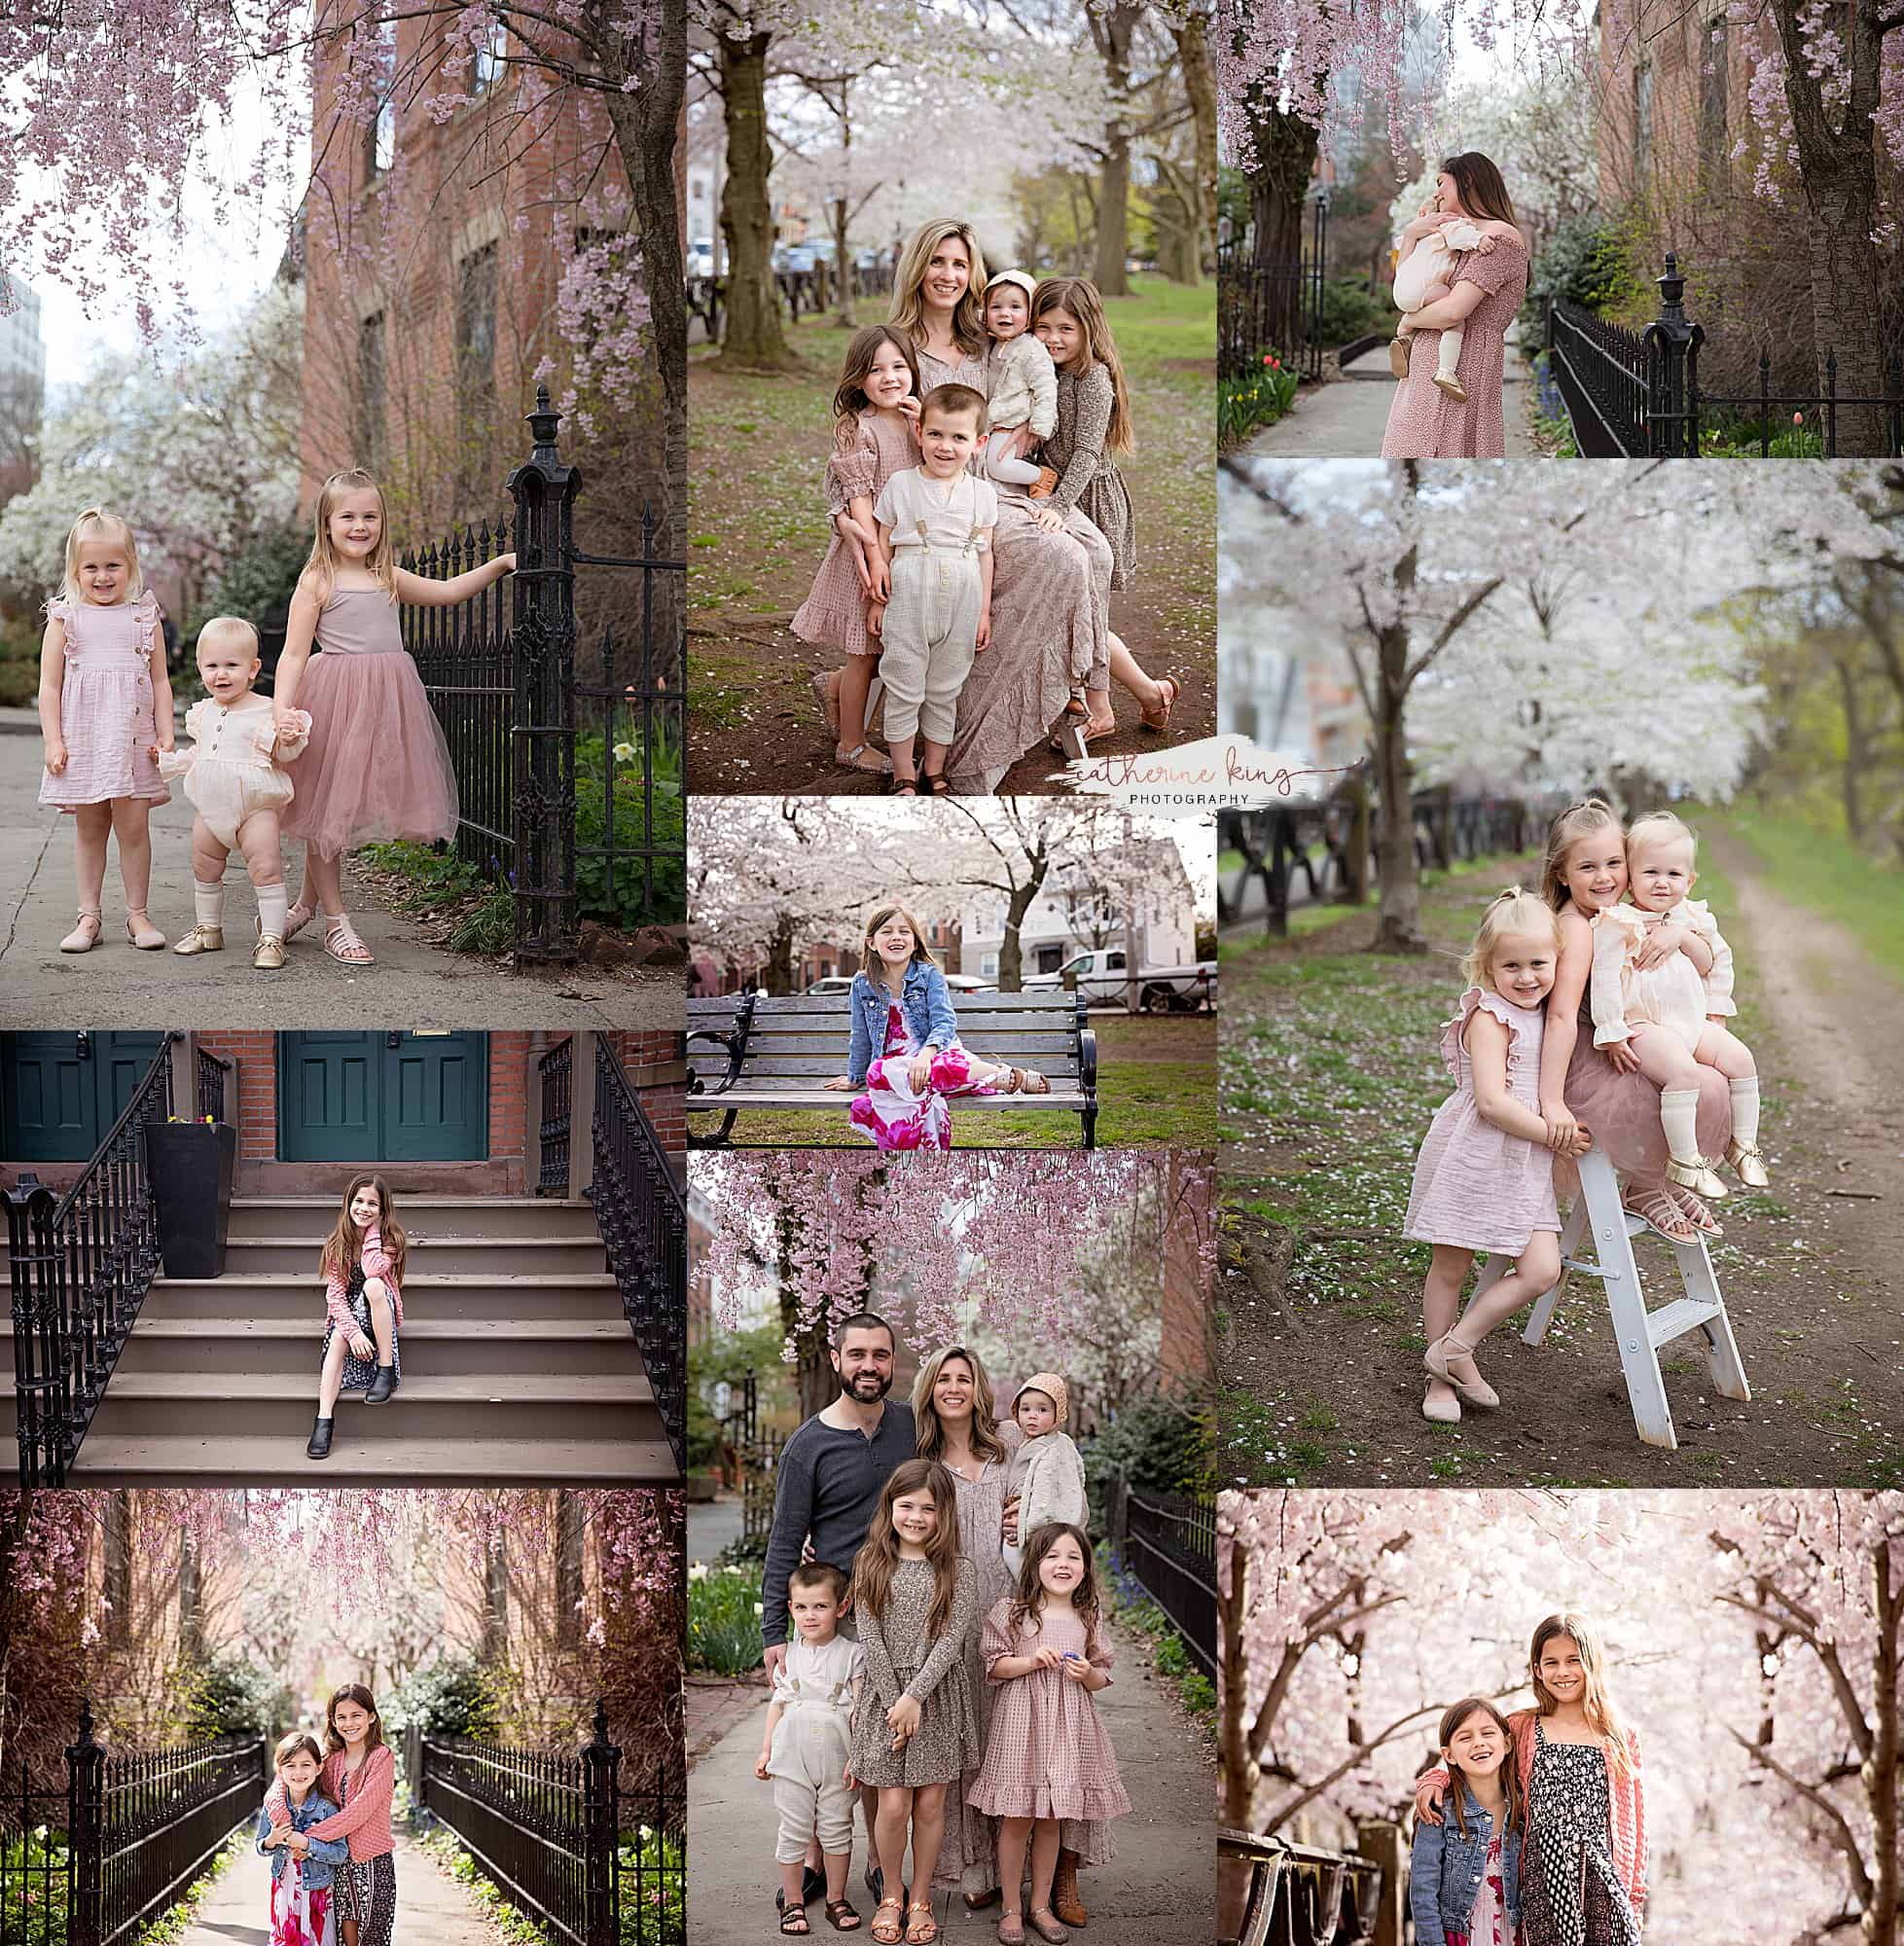 Family photography with New Haven CT Cherry Blossoms this Spring